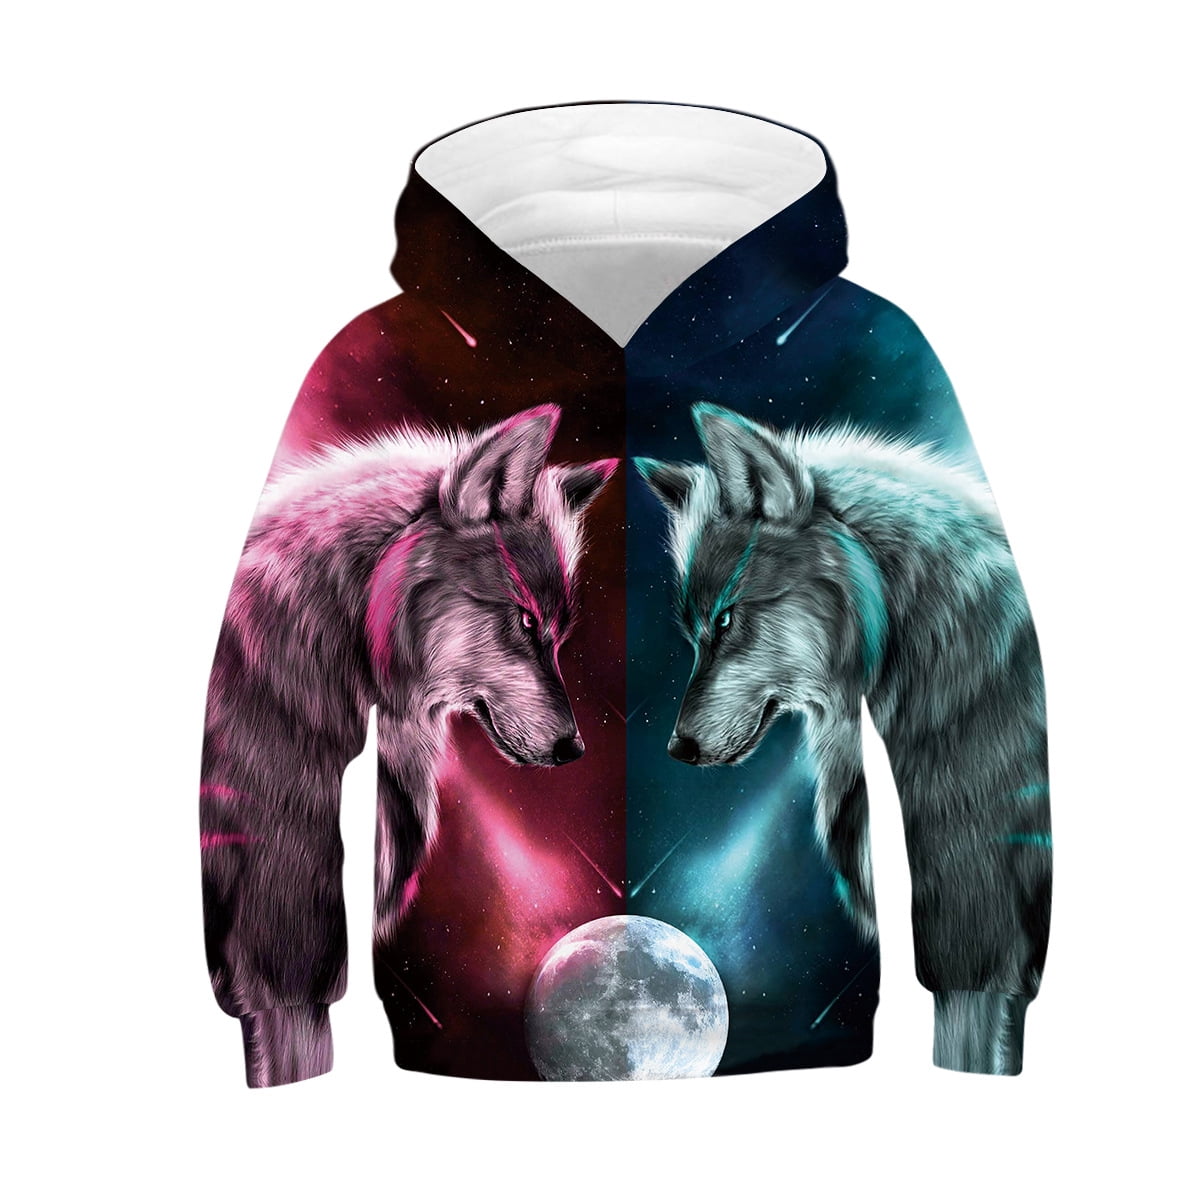 Clear and blue Ice fire wolf shape children's hoodie casual sweater - Walmart.com